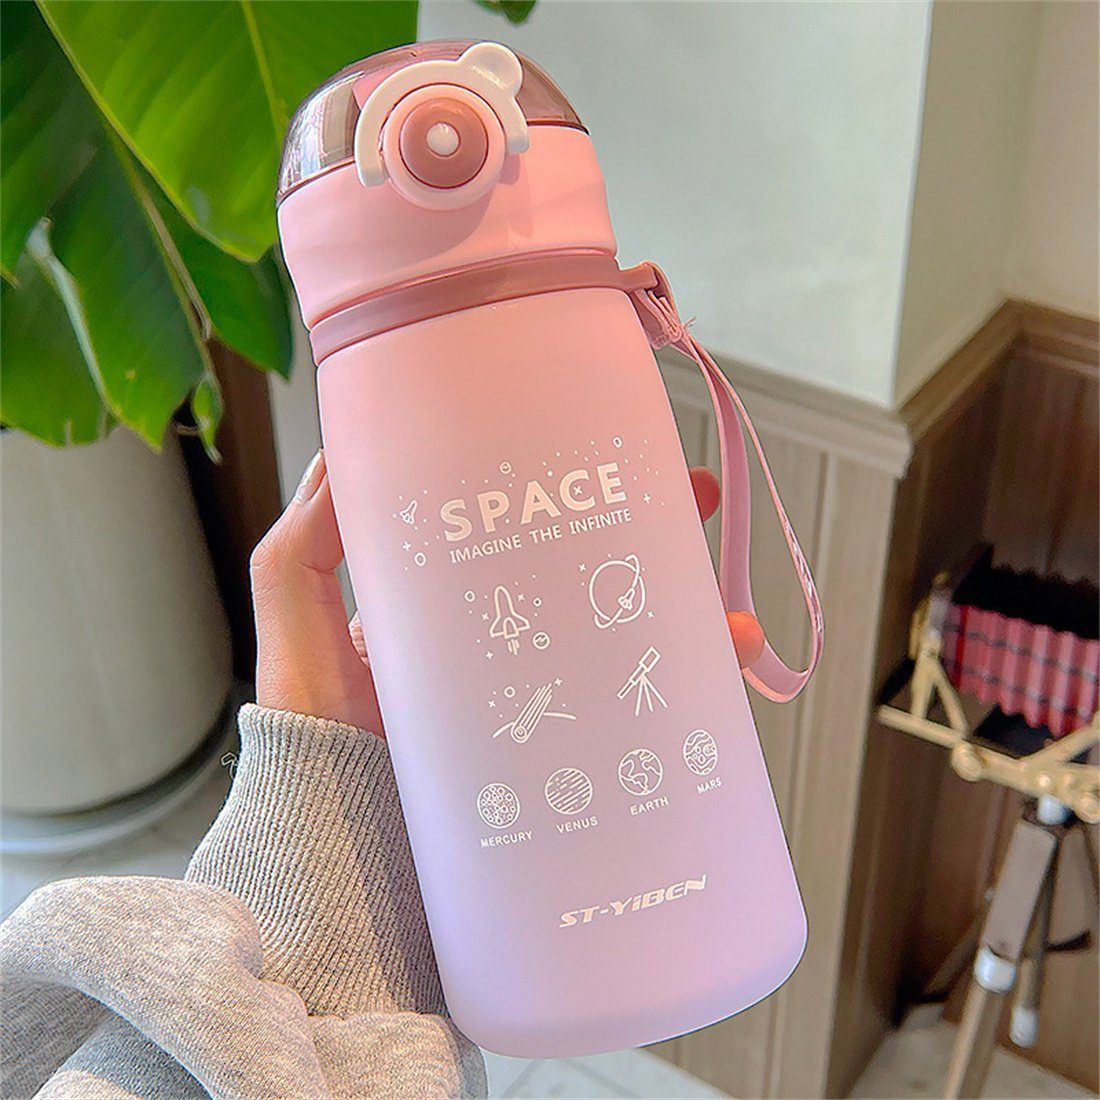 DÖRÖY Gradient Mug Mug, Frosted Bottle, Trinkflasche Sports Outdoor Rosa 630ml Space Portable